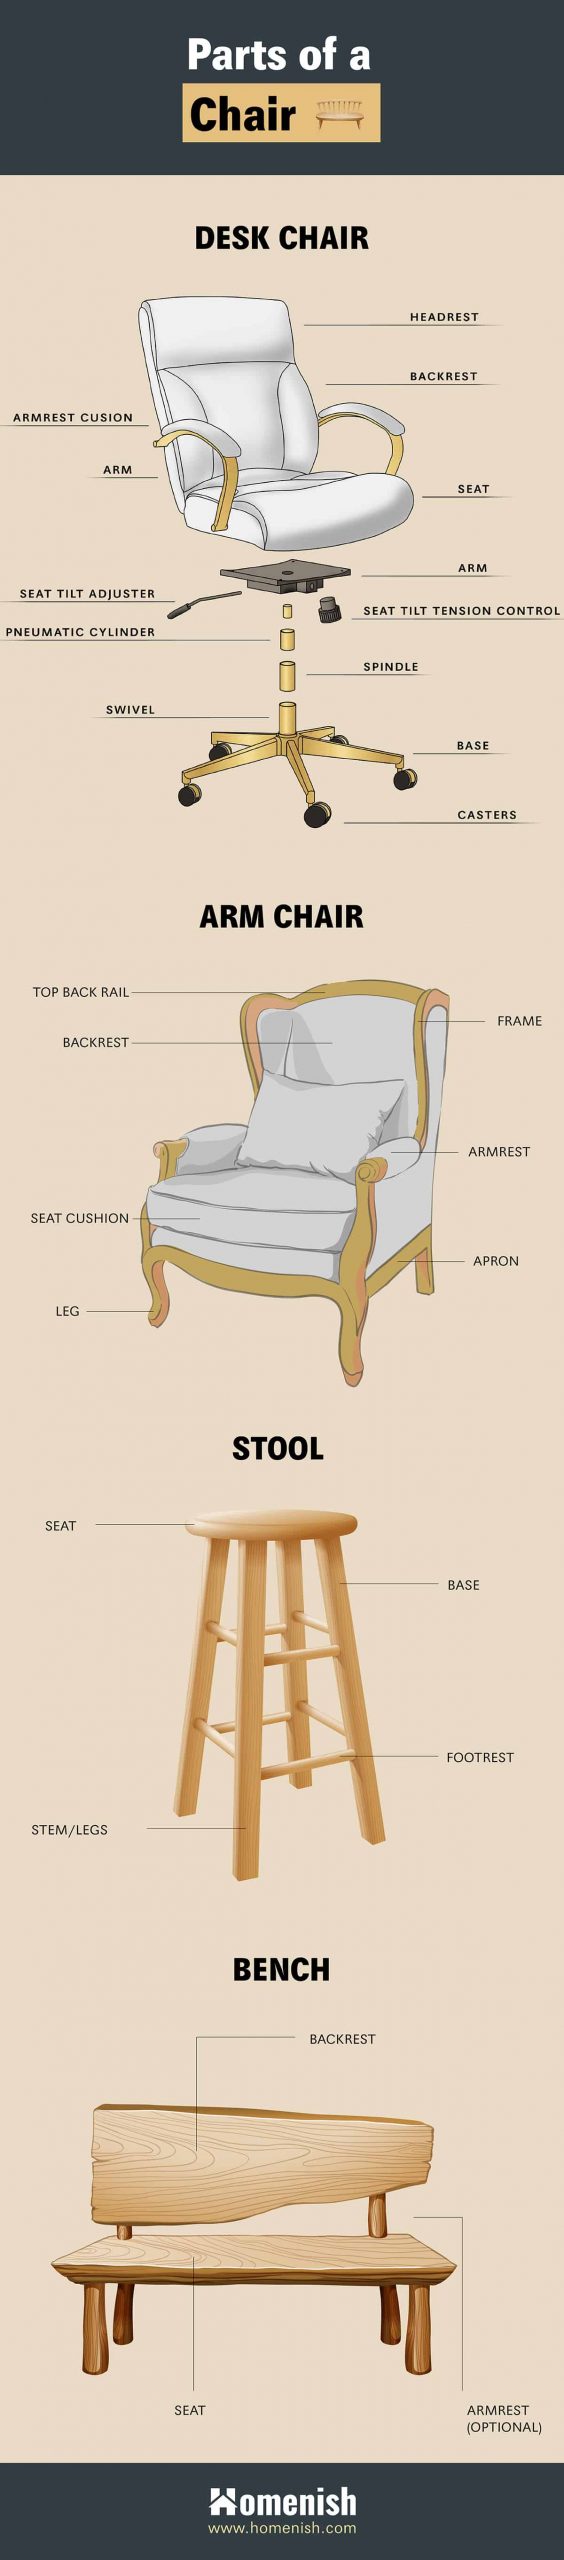 Parts of a Chair Infographic